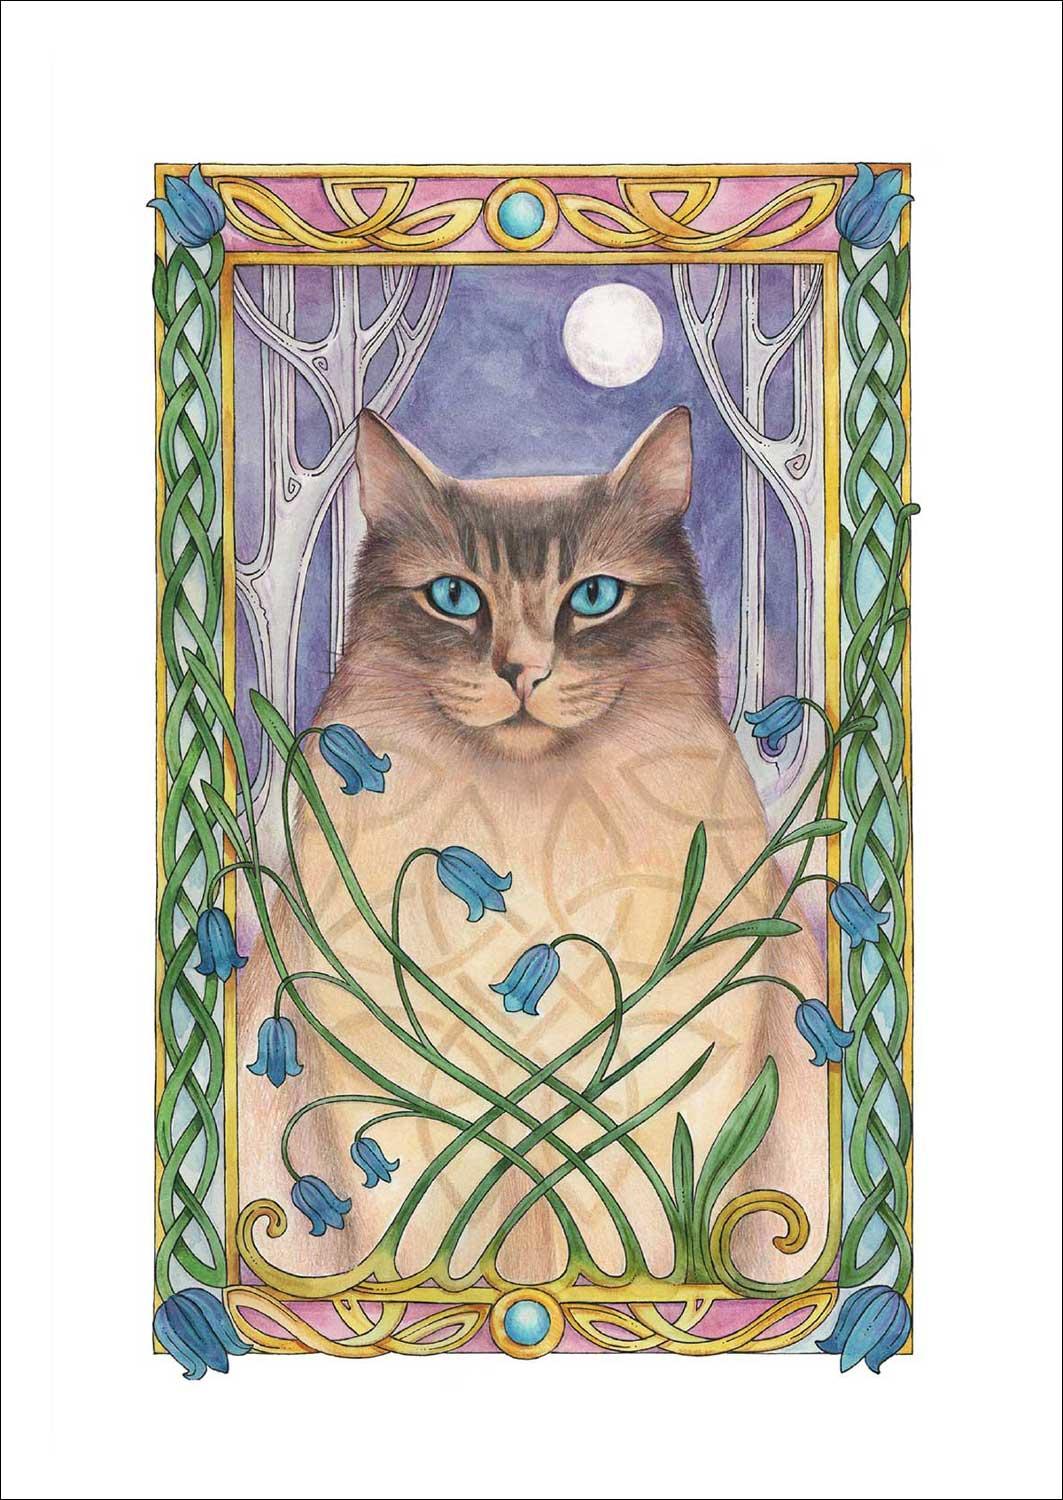 Moon Meow Art Print from an original painting by artist Marjory Tait